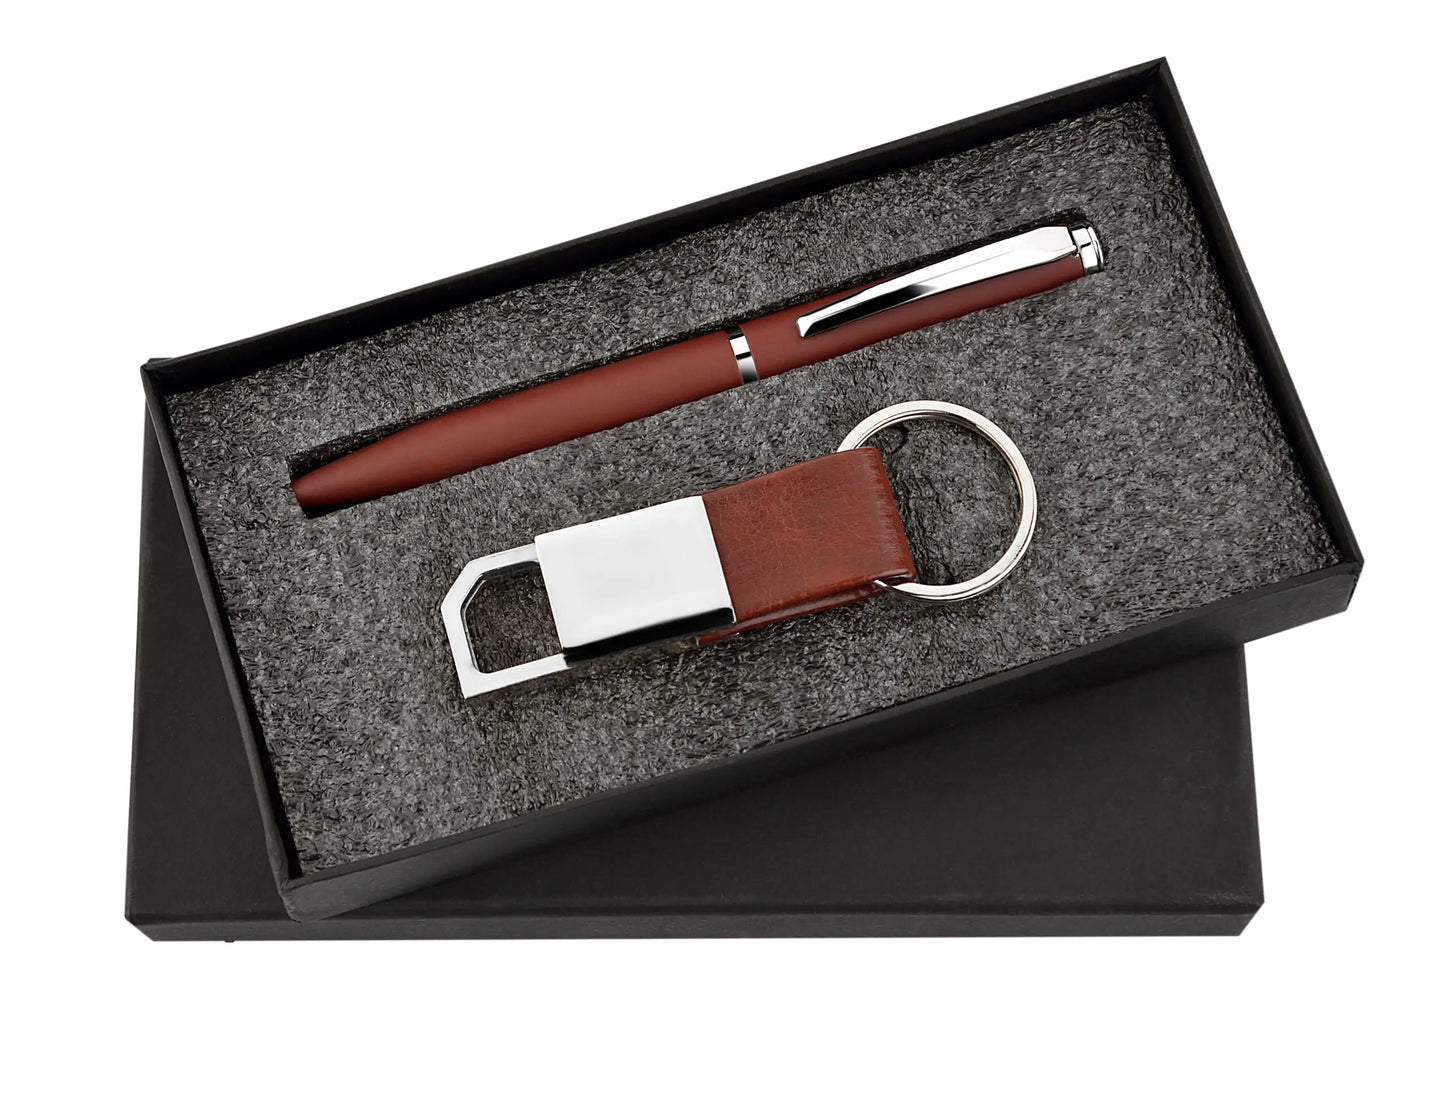 Pen and Keychain 2in1 Combo Gift Set - For Employee Joining Kit, Corporate, Client or Dealer Gifting, Promotional Freebie JKSR112